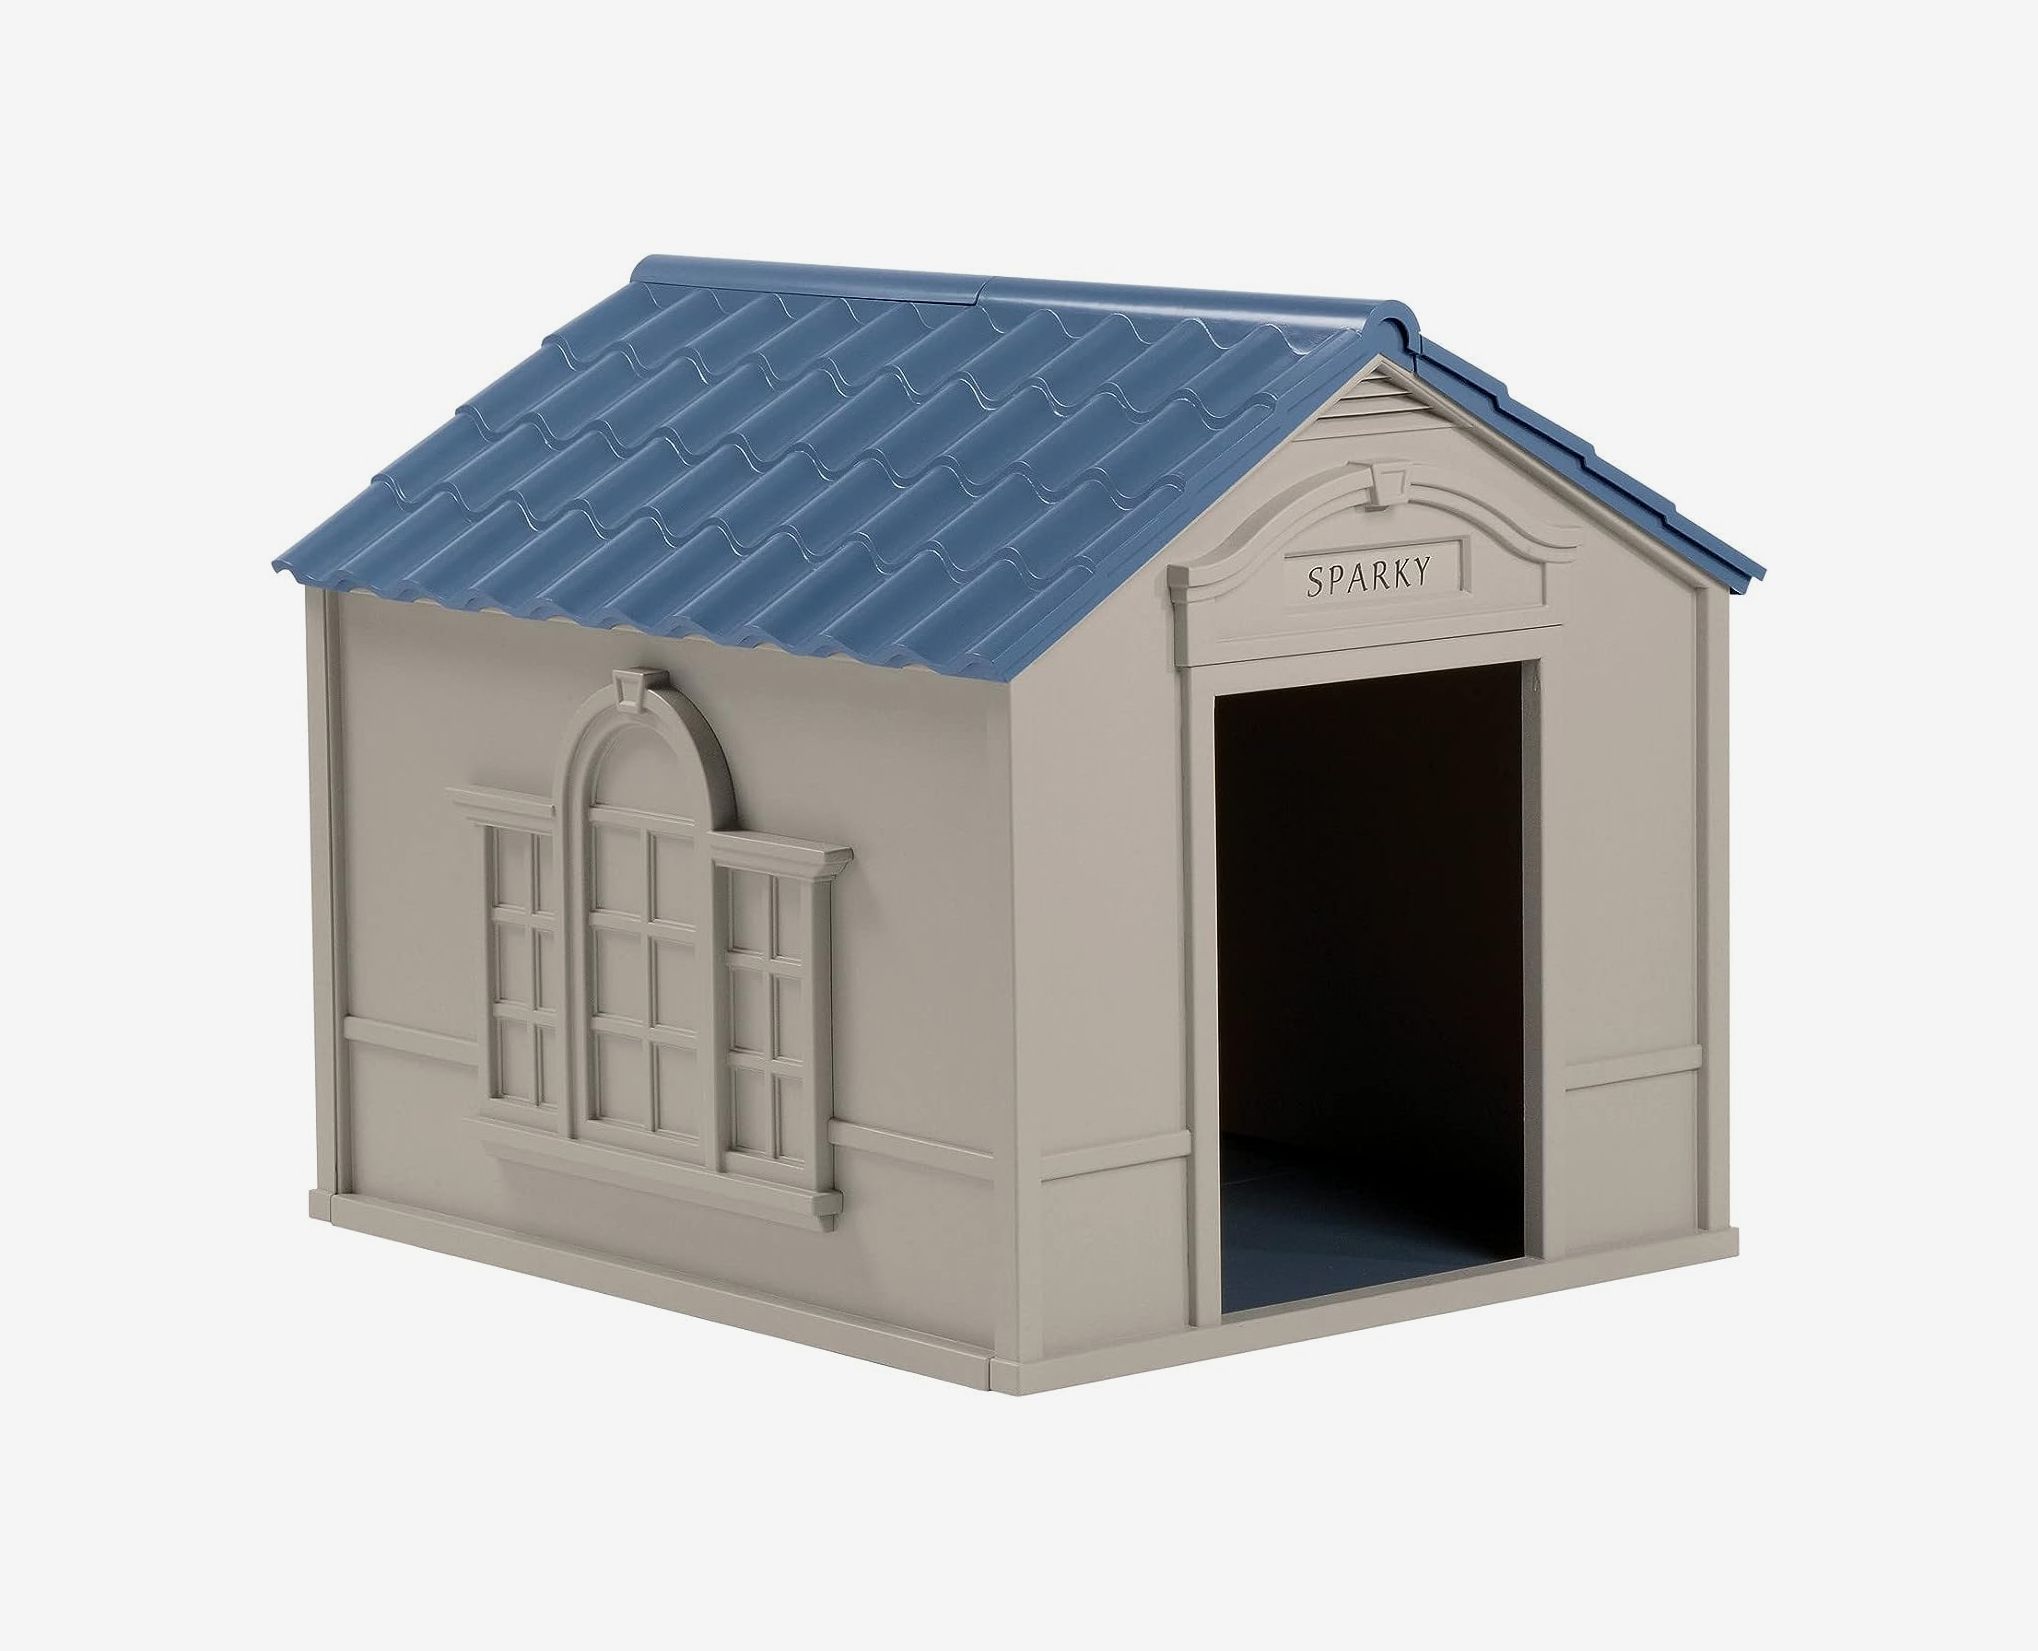 The 11 Best Dog Houses and Outdoor Kennels for Your Pup